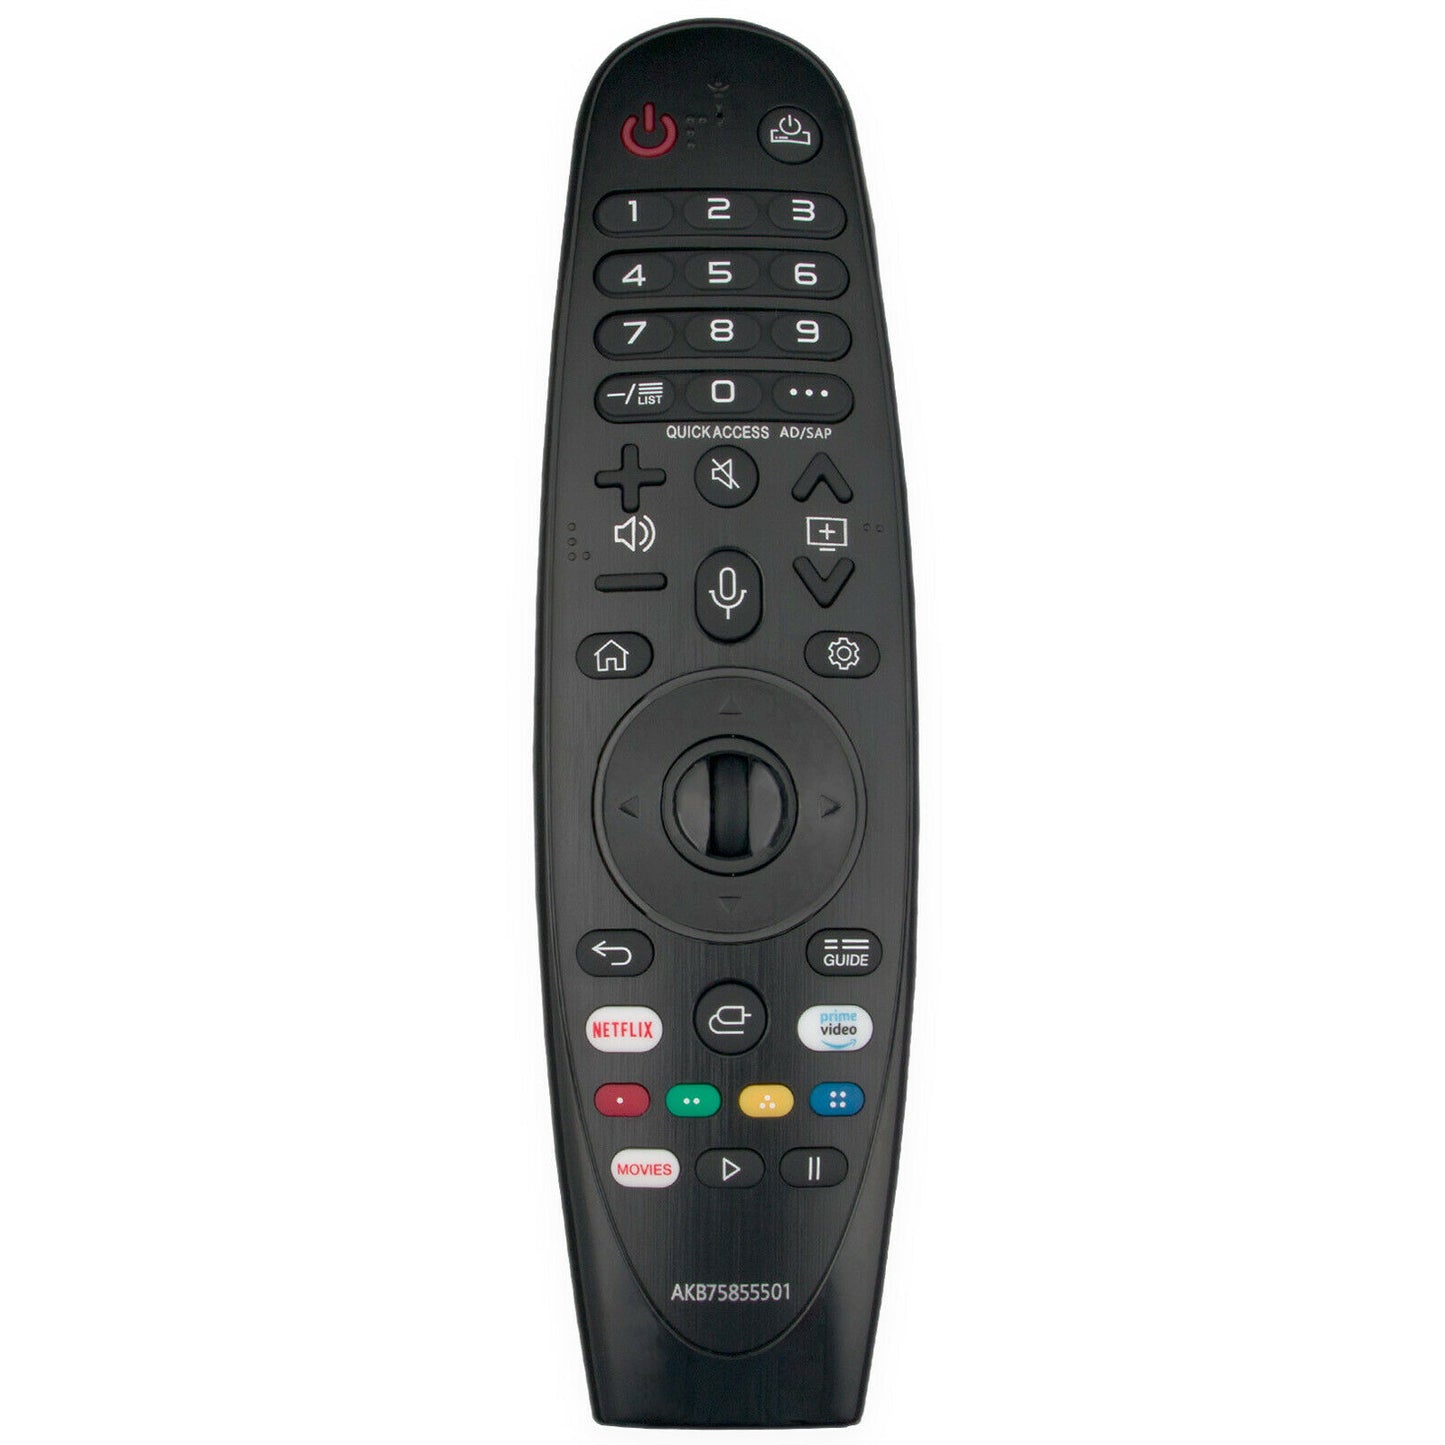 AKB75855501 MAGIC REMOTE CONTROL fit for LG SMART TV AN-MR650A AKB75075301